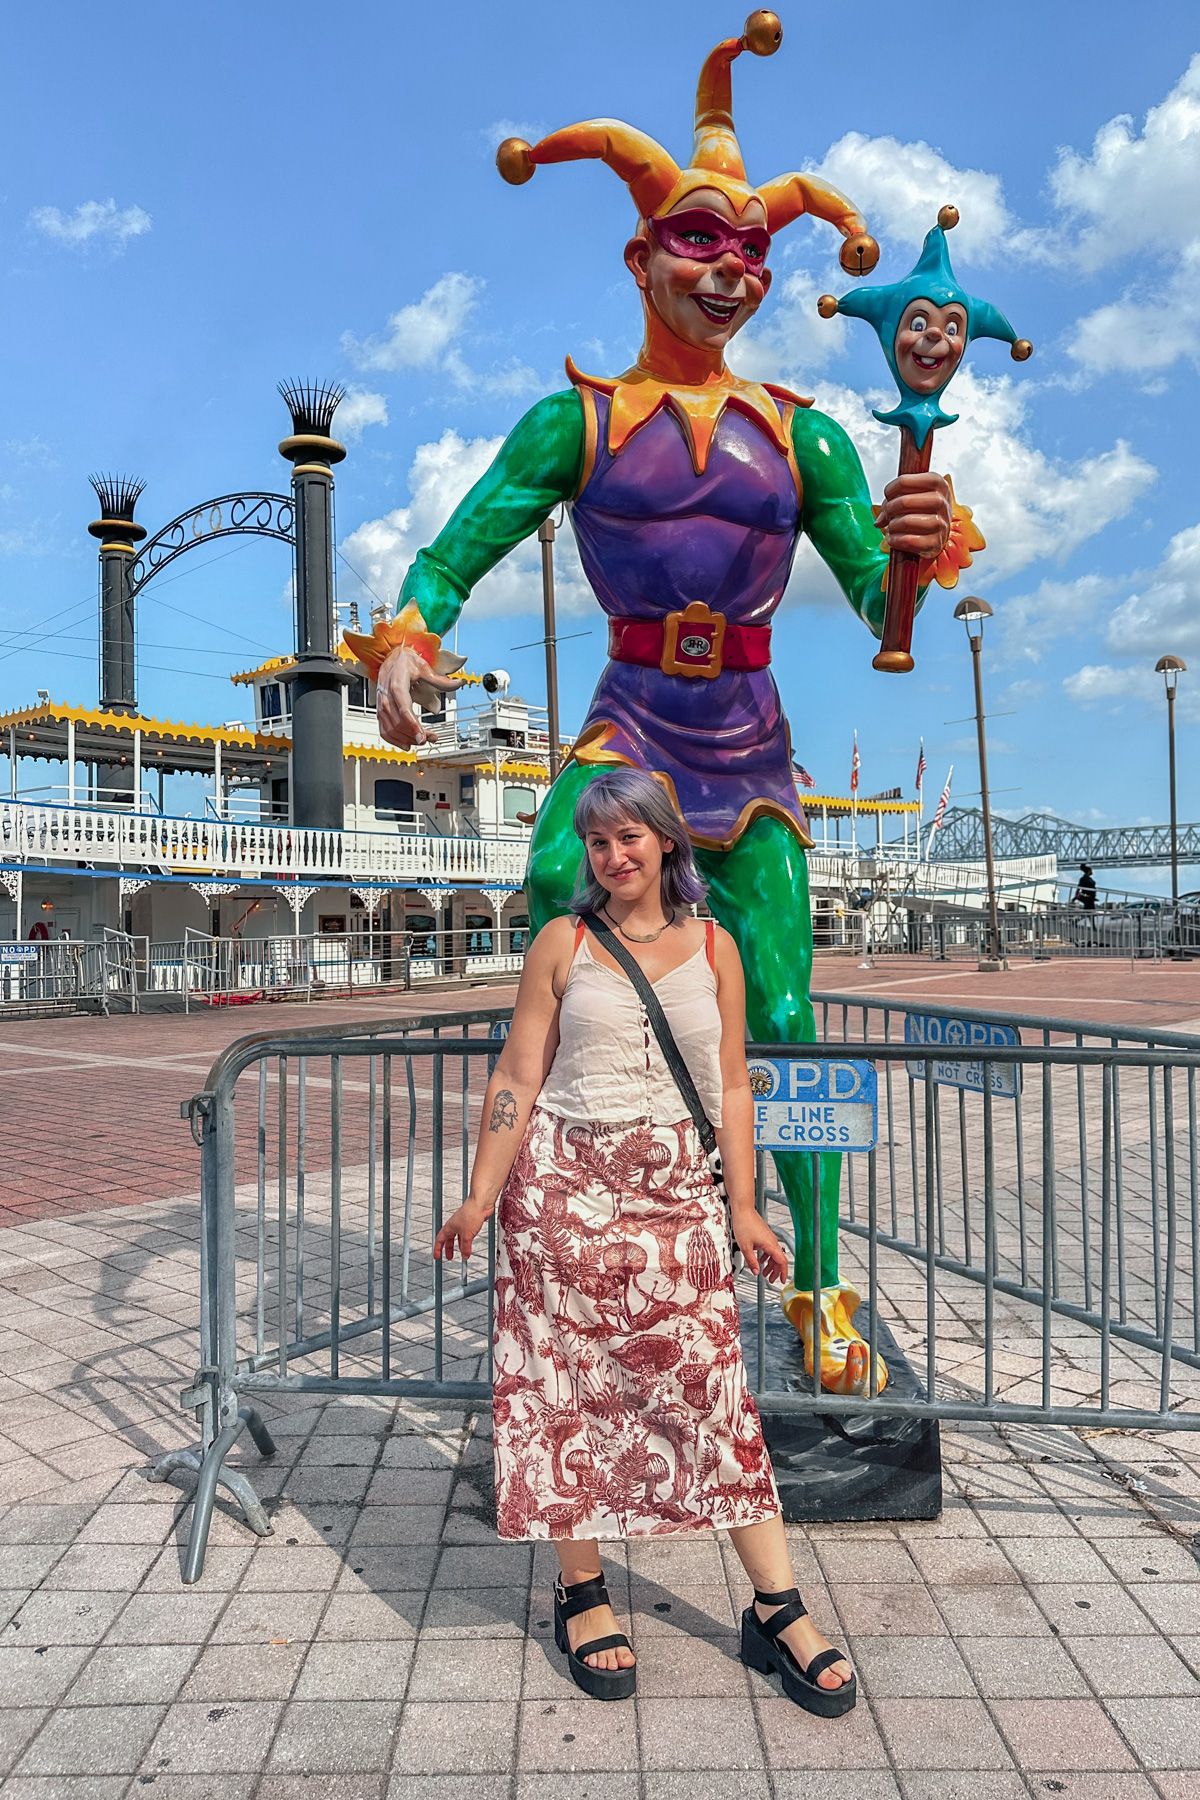 A purple-haired woman wearing a long, mushroom-printed skirt and a white tank top smiles as she stands in front of a statue of a purple and green jester, with a riverboat in the background.